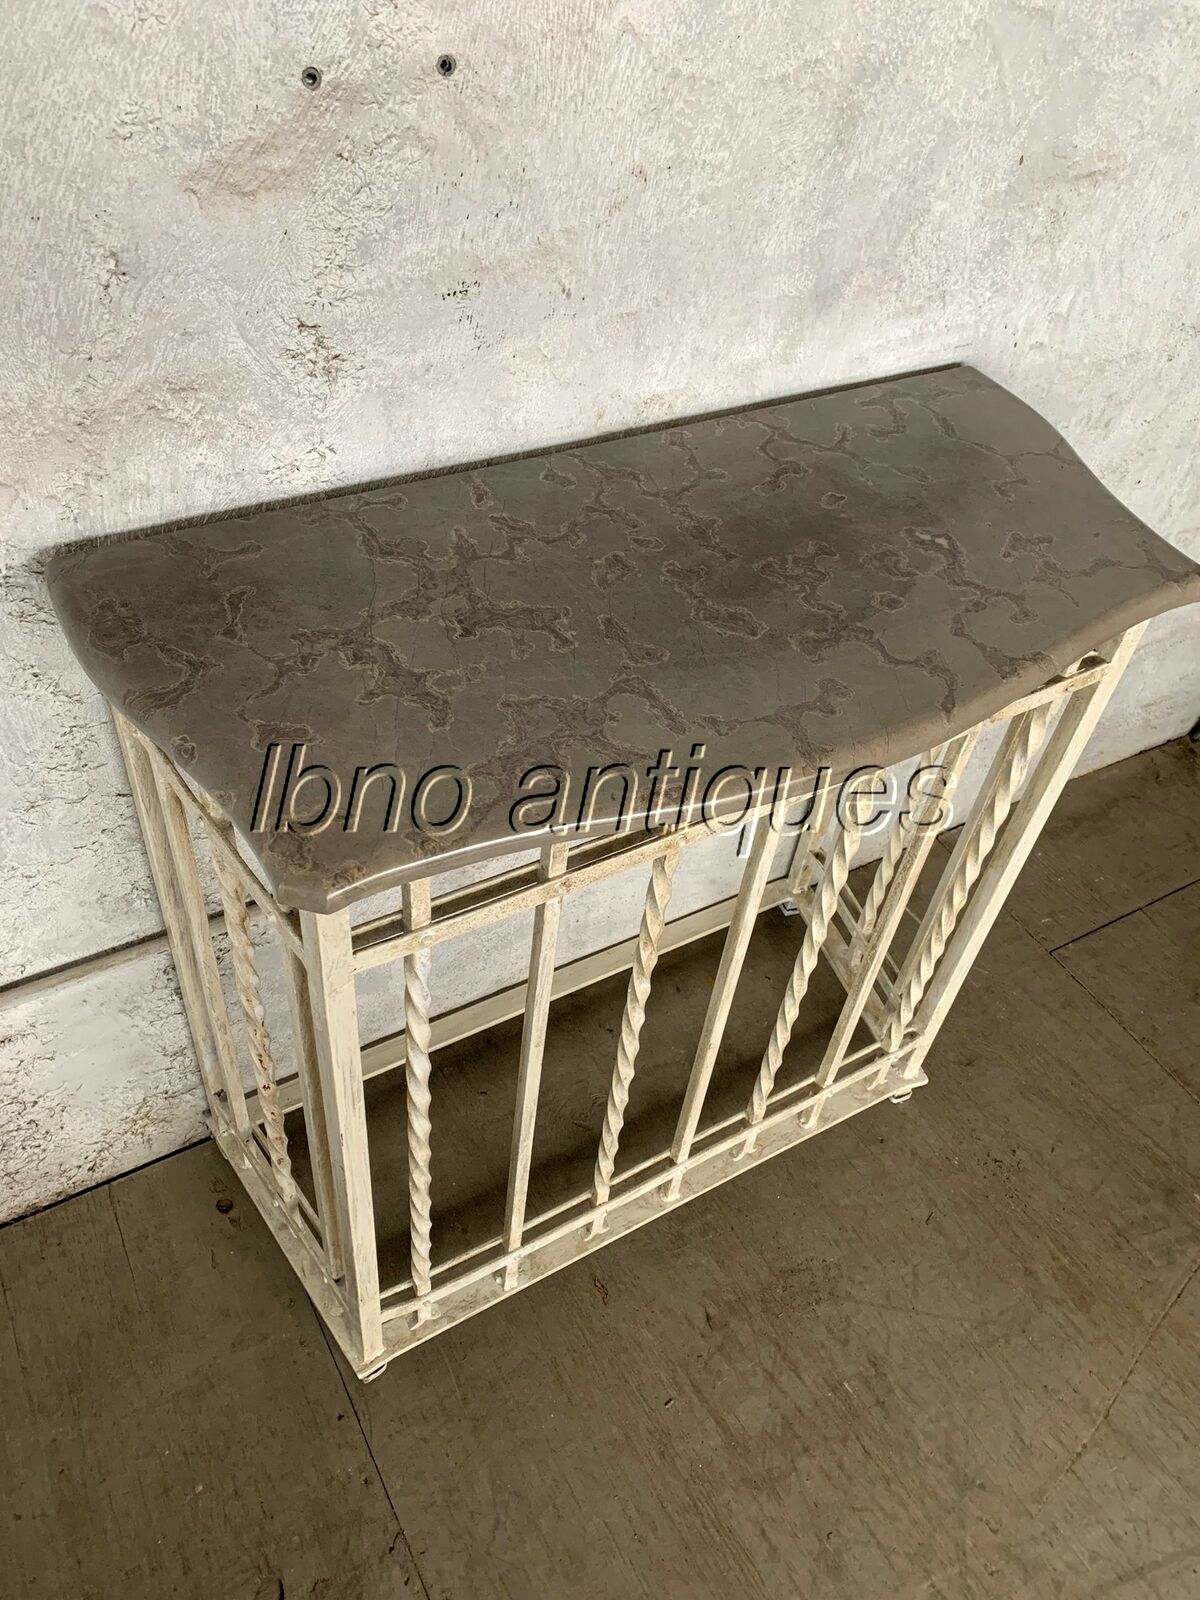 EARLY 1900s WROUGHT IRON ARCHITECTURAL CONSOLE TABLE W/ MARBLE TOP. IN/OUTSIDE